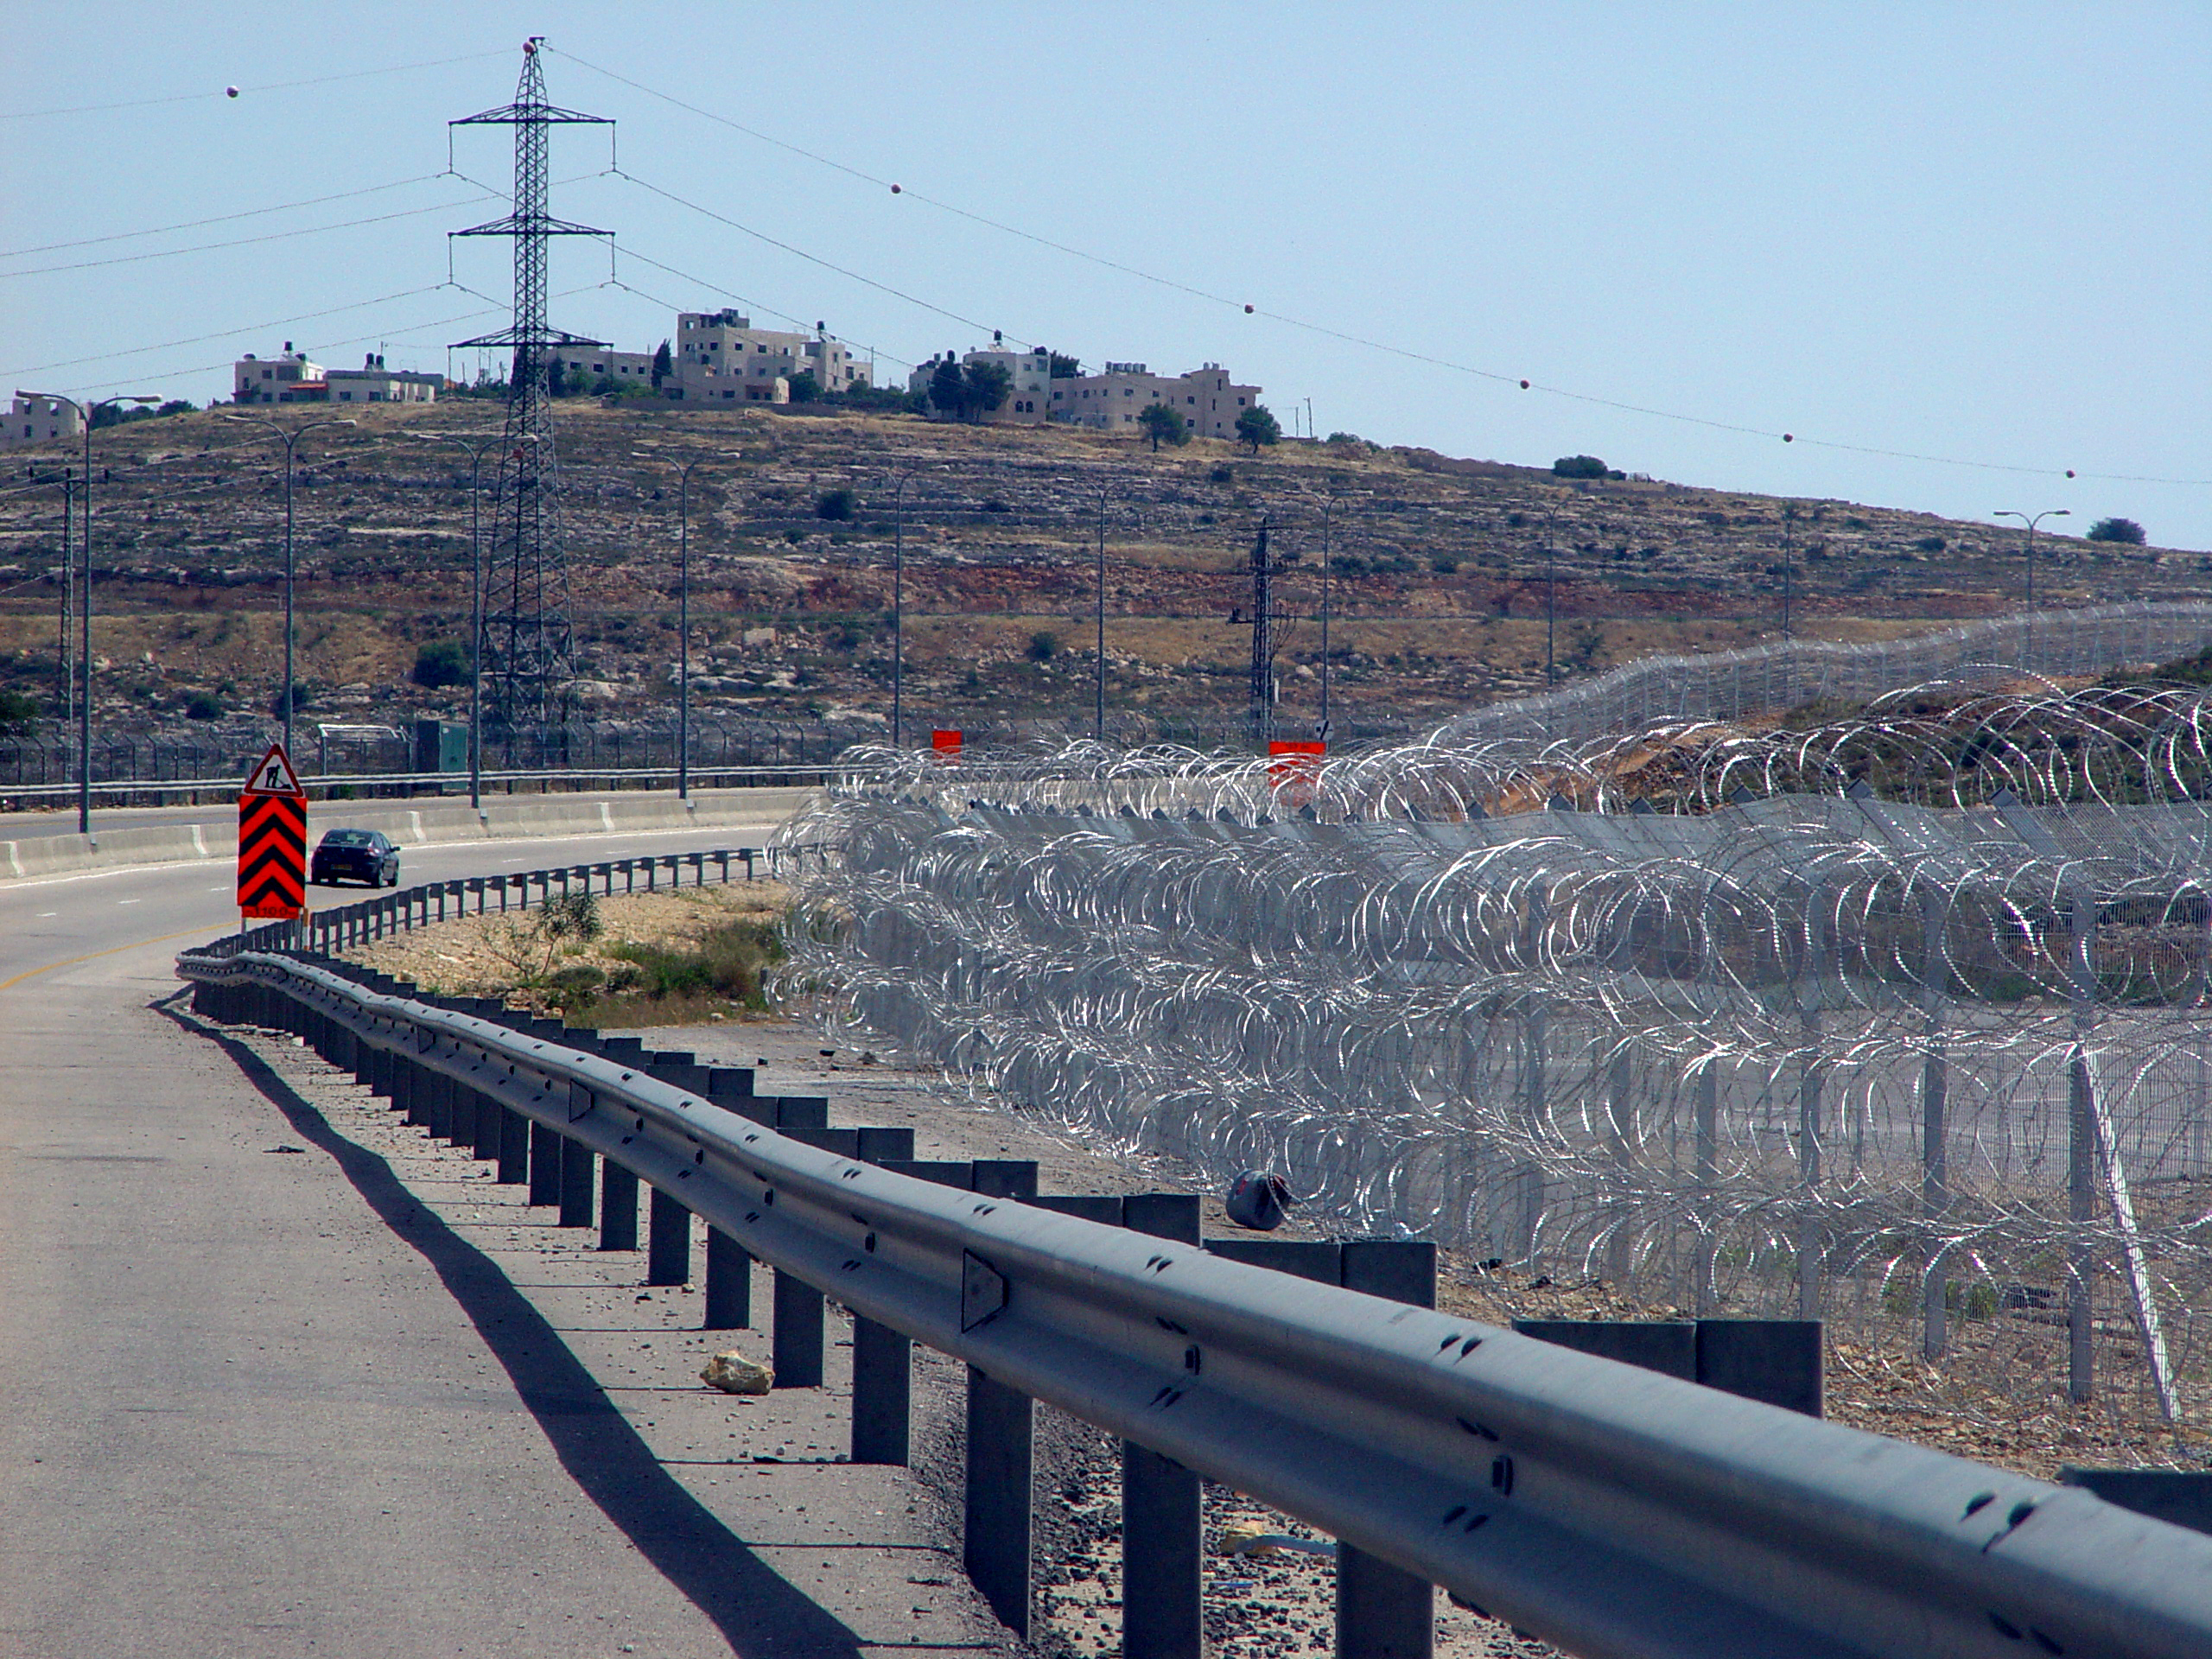 Route 443 near Giv'at Ze'ev Junction, with pyramid-shaped stacks of razor wire forming a section of the Israeli West Bank barrier